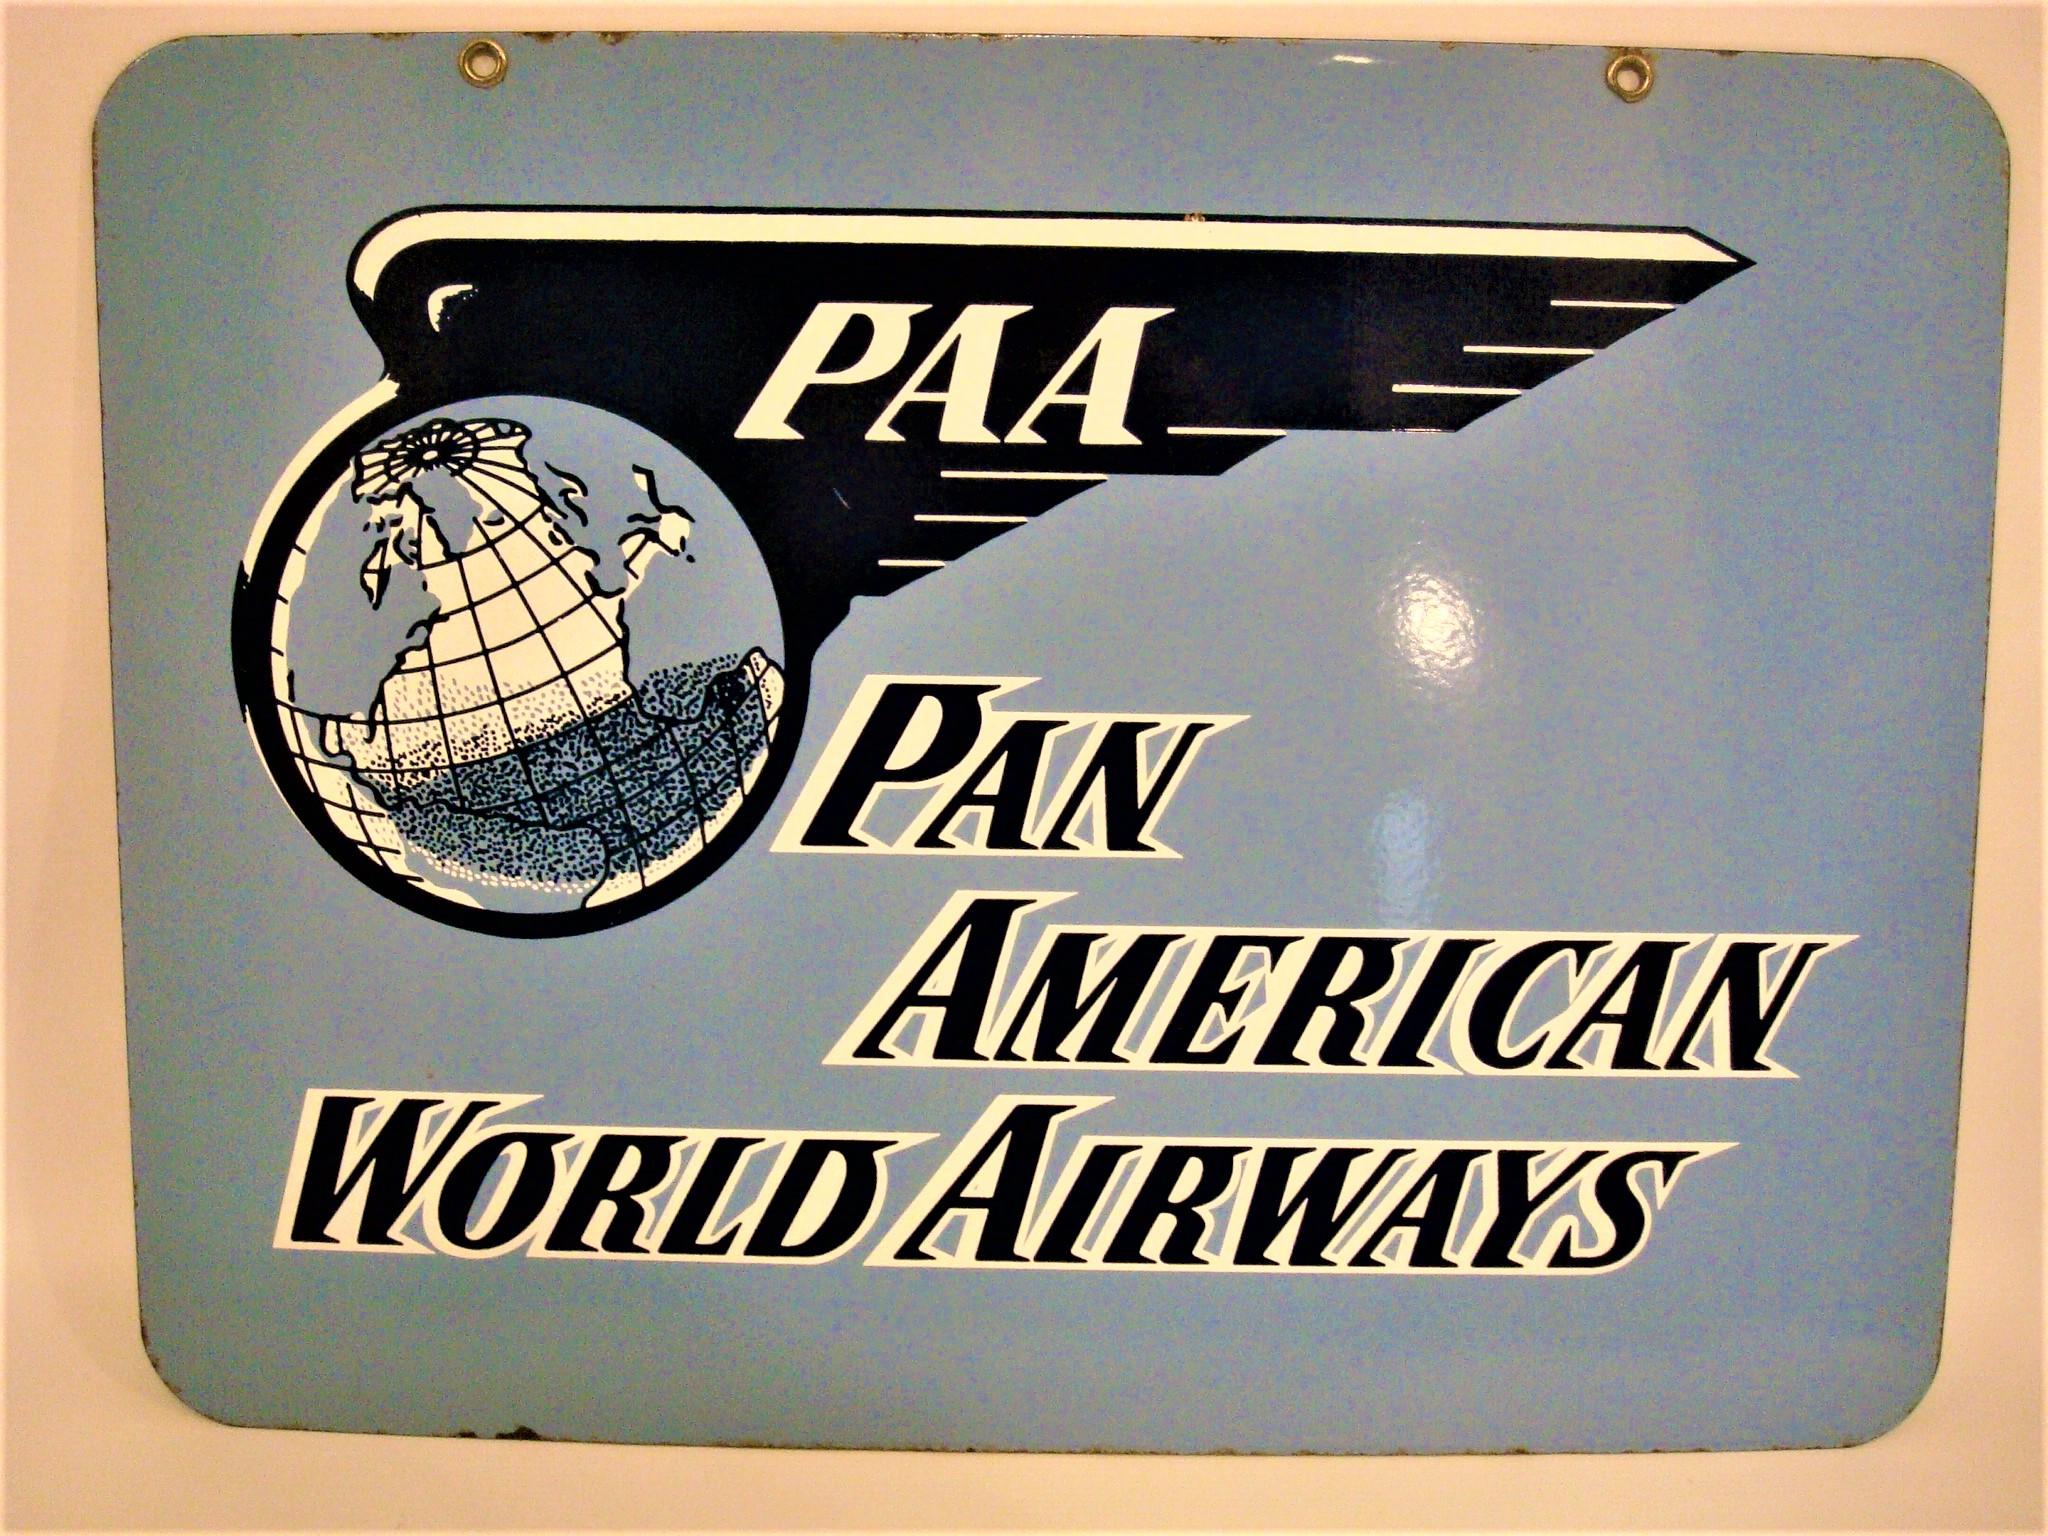 Rare mid-20th century / vintage Pan American World Airways Porcelain / Enamel Sign. This sign is for Pan American World Airways. The sign’s colors are light and dark blue, and white. The text on the sign reads: PAA Pan American World Airways. The